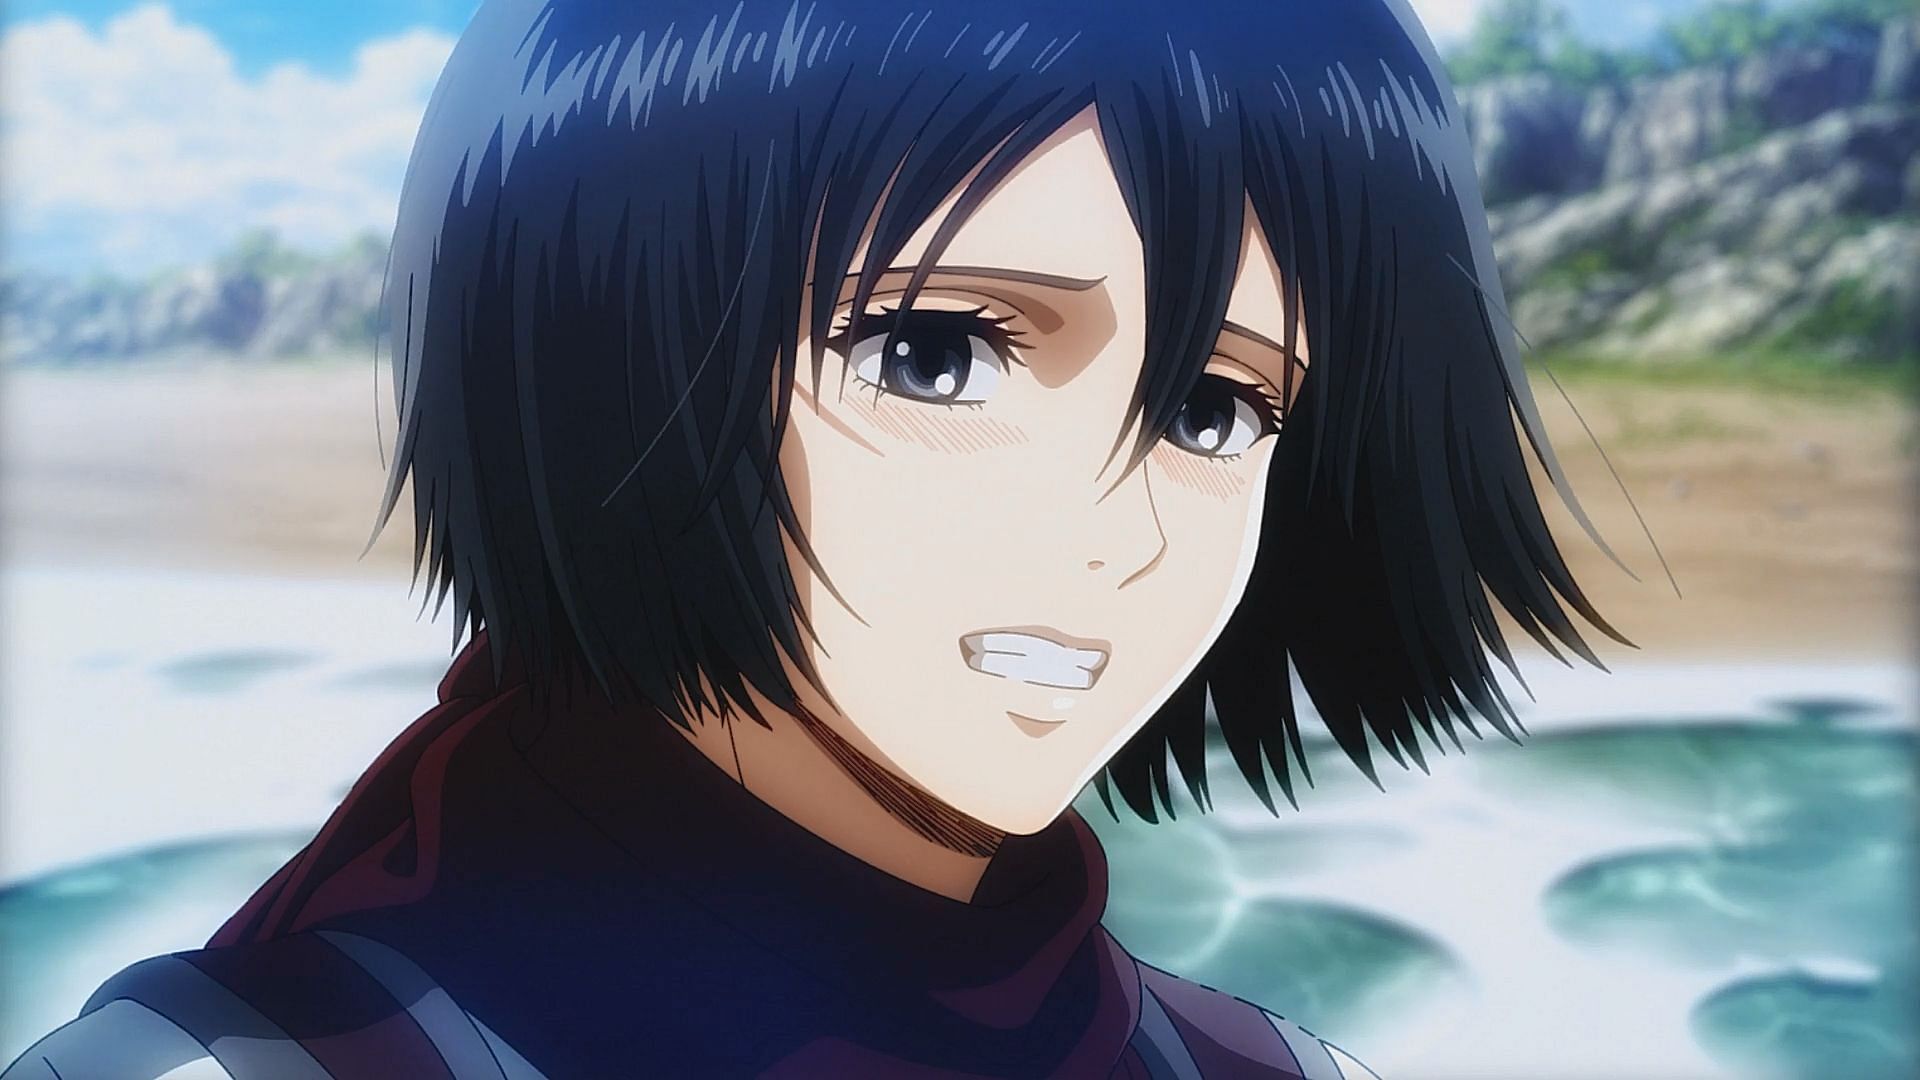 Who will end up with Mikasa in Attack on Titan?